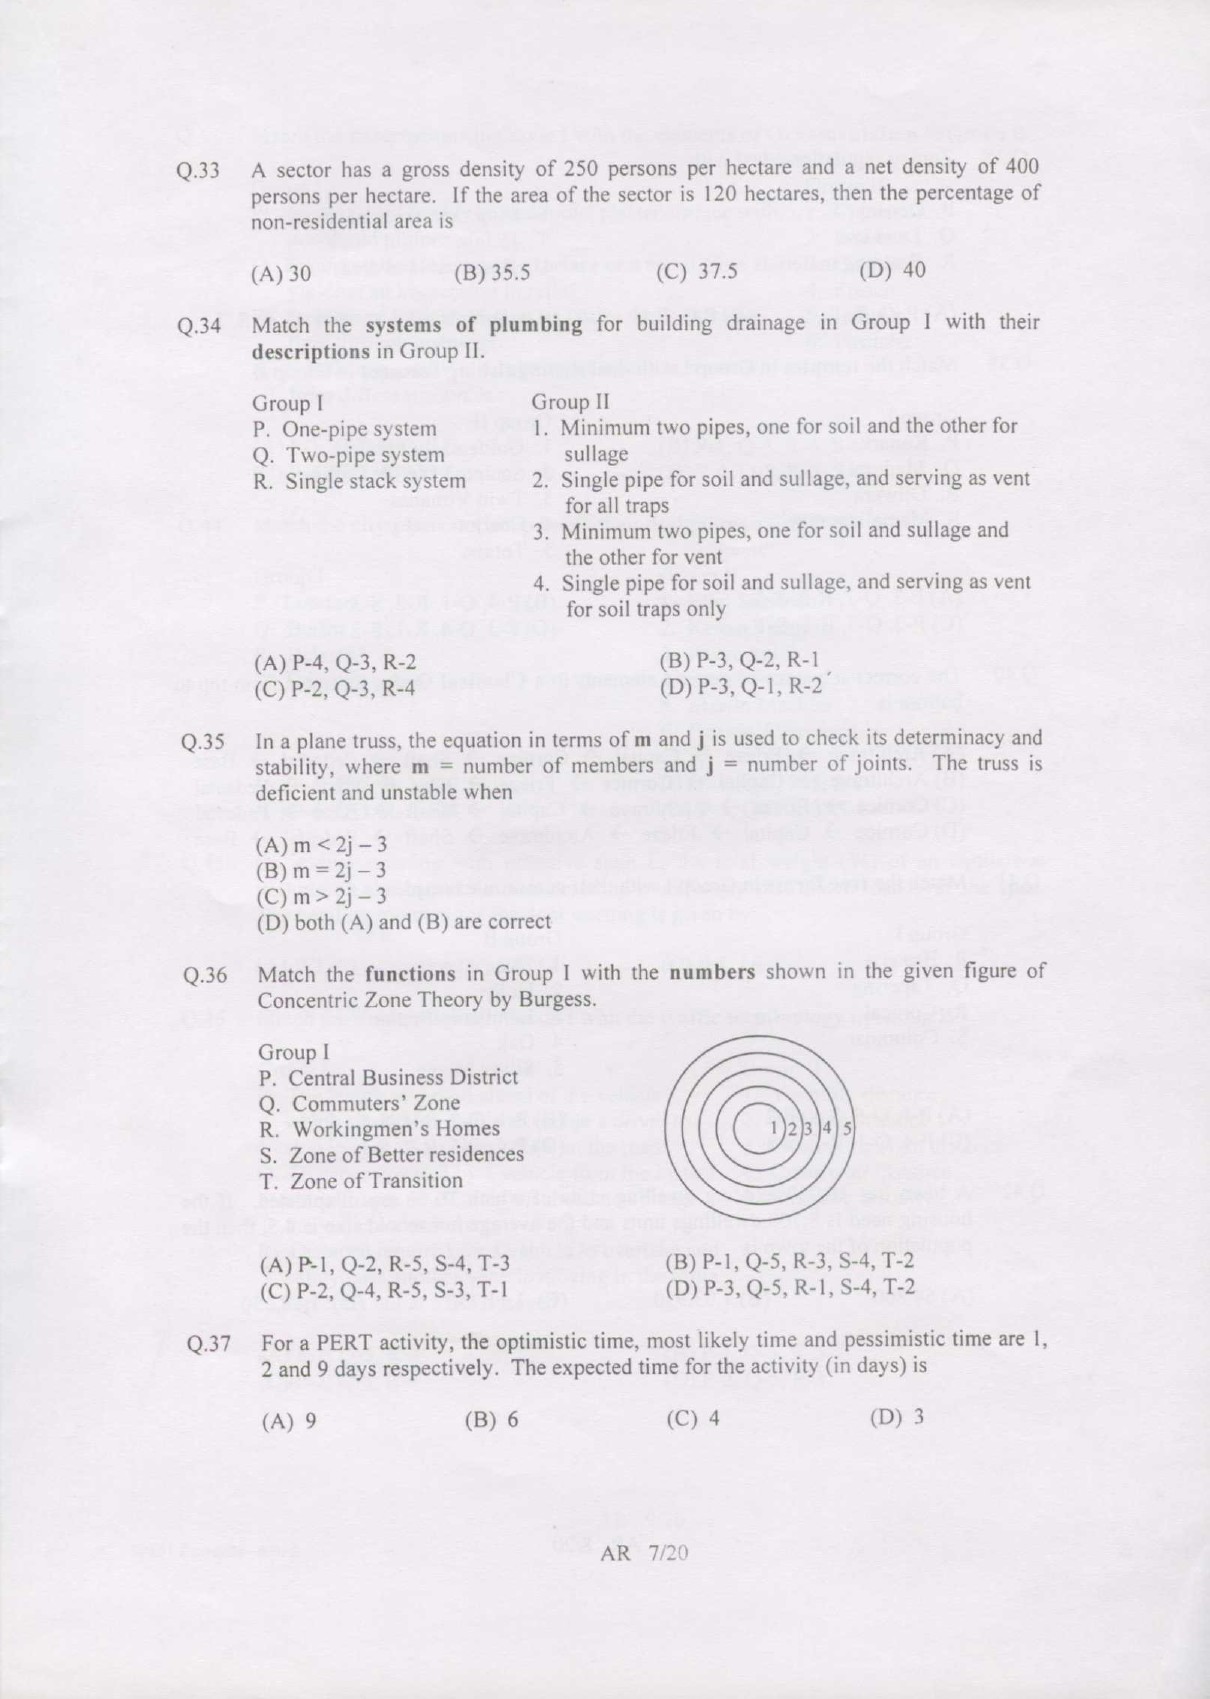 GATE Exam Question Paper 2007 Architecture and Planning 7